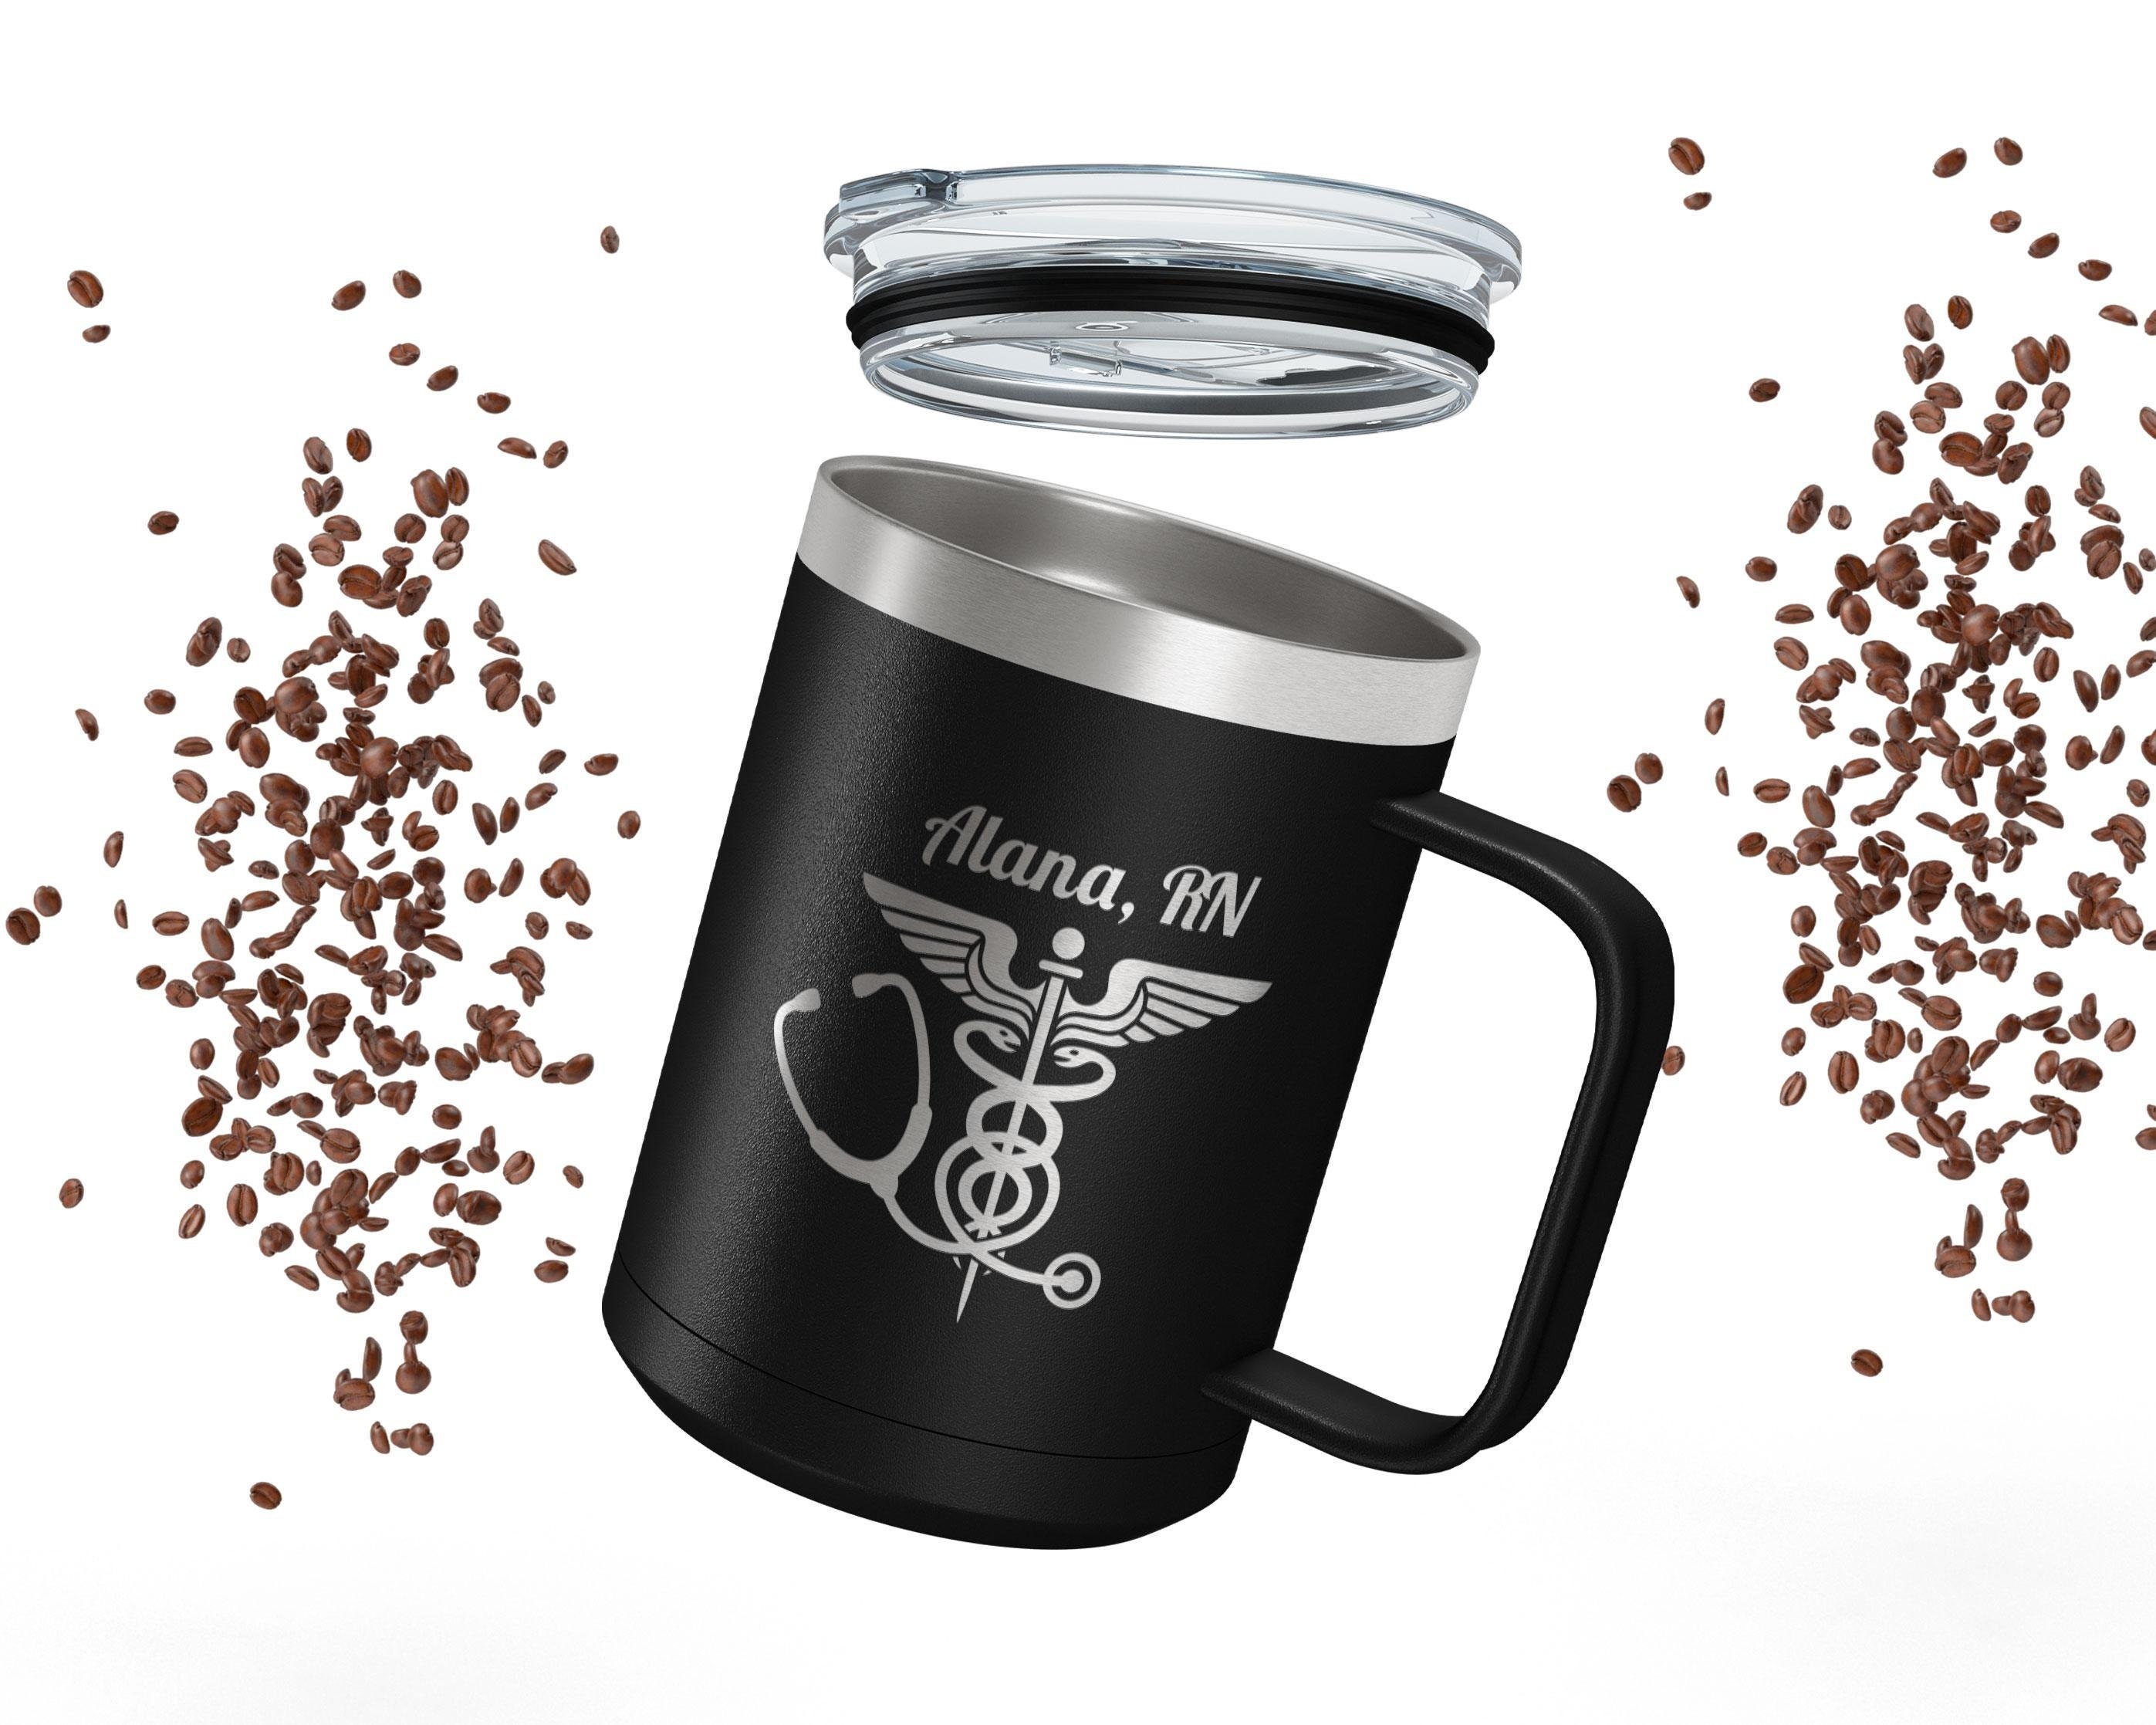 Stethoscope Personalized Travel Coffee Mug for Medical Professionals, -  Everything Etched